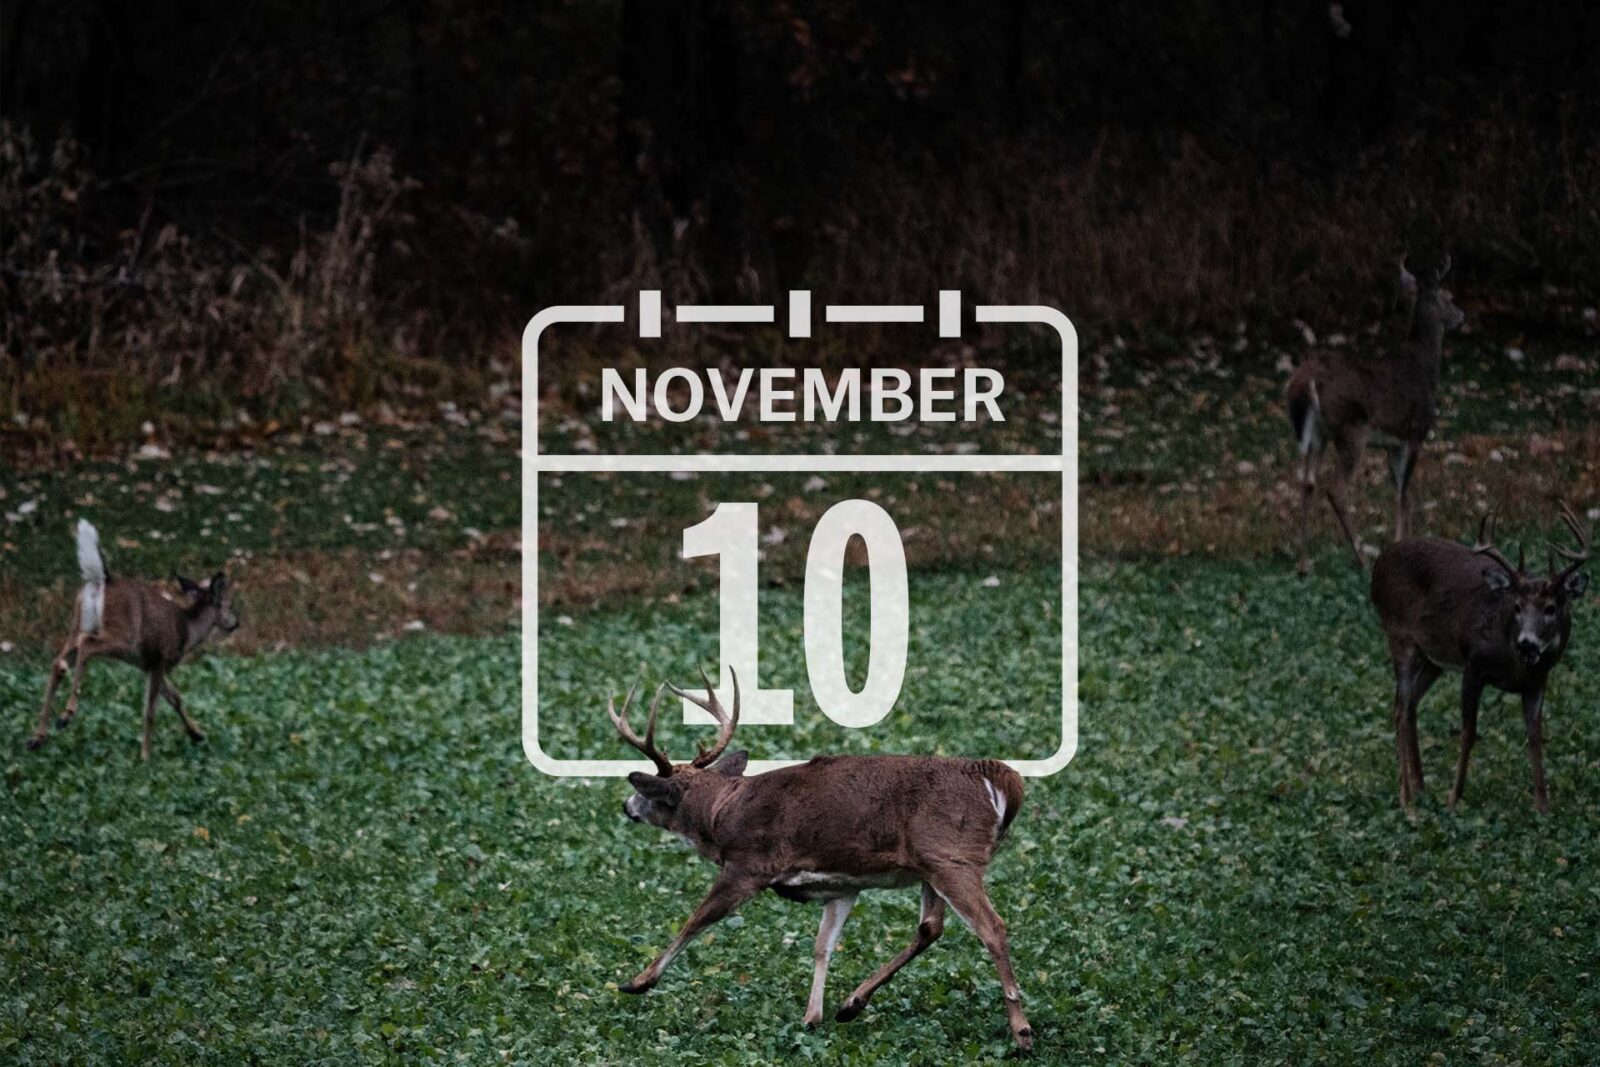 November 10 calendar date overlayed on an image of the whitetail deer rut